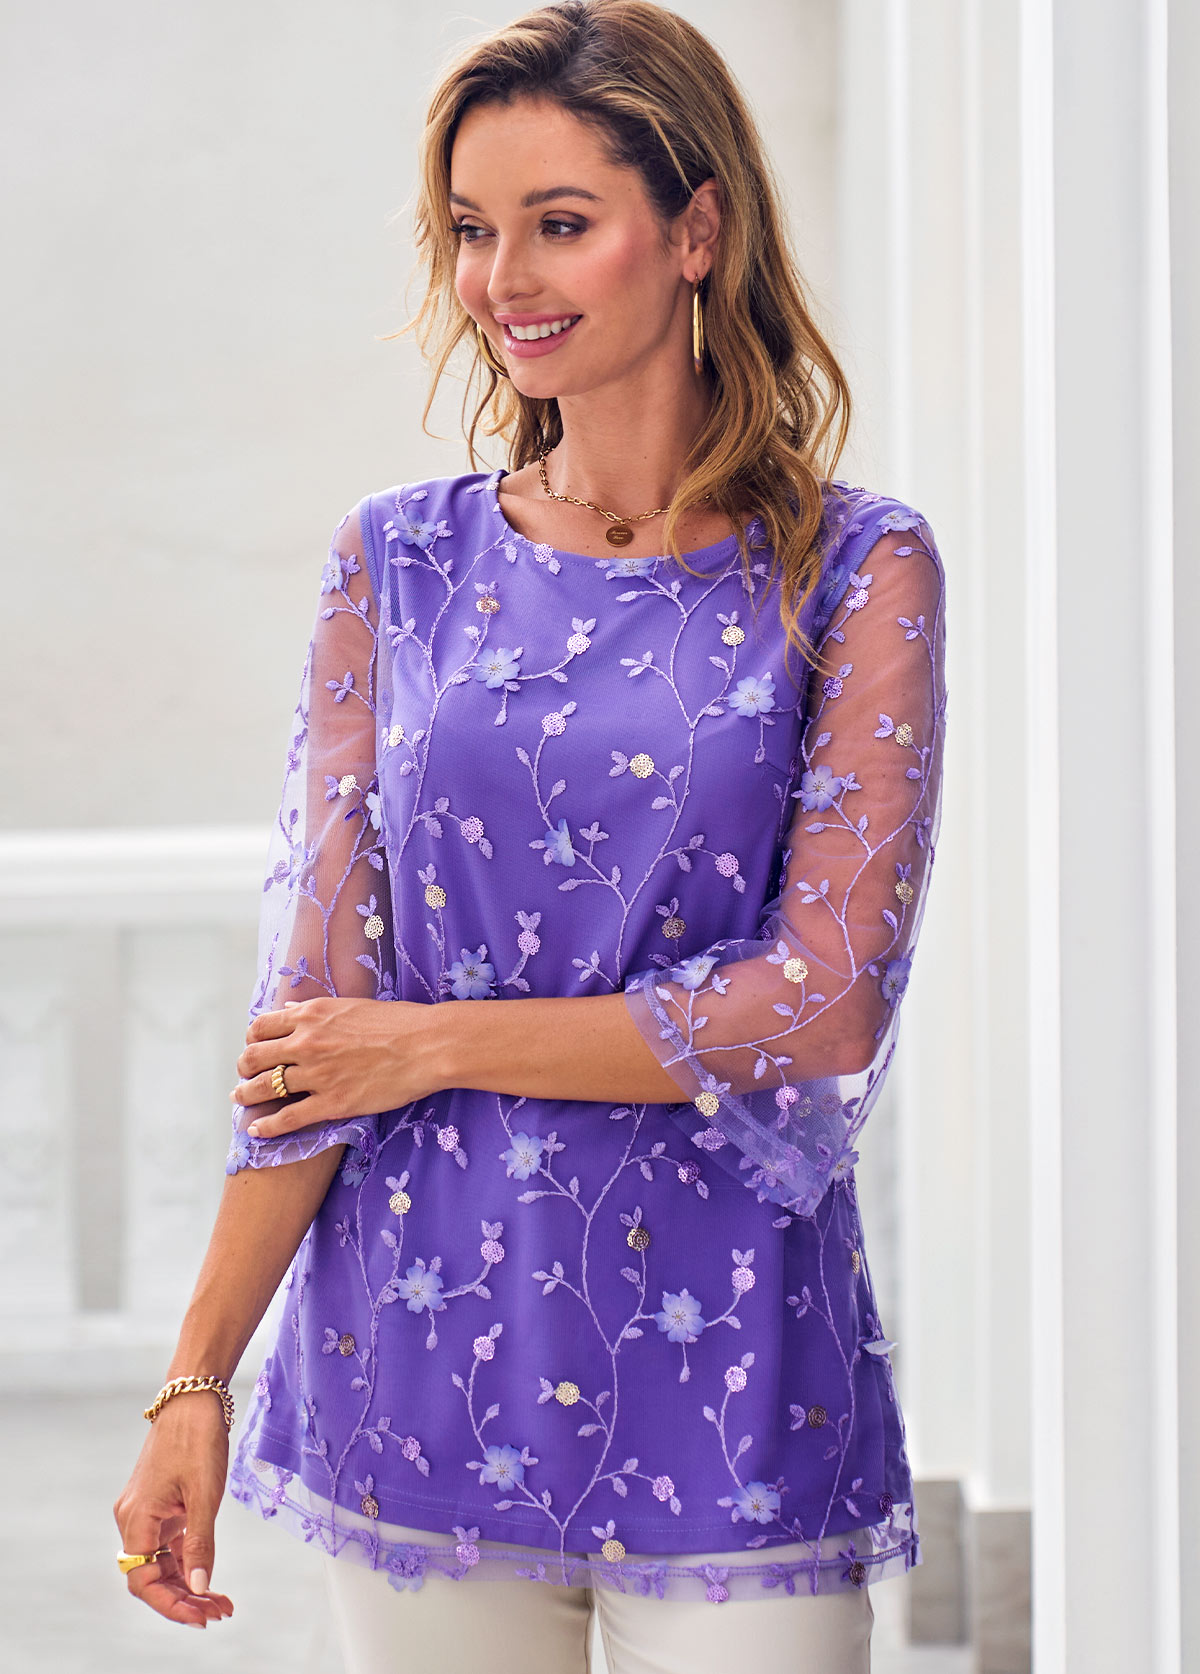 Mesh Stitching Embroidered Purple 3/4 Sleeve Blouse